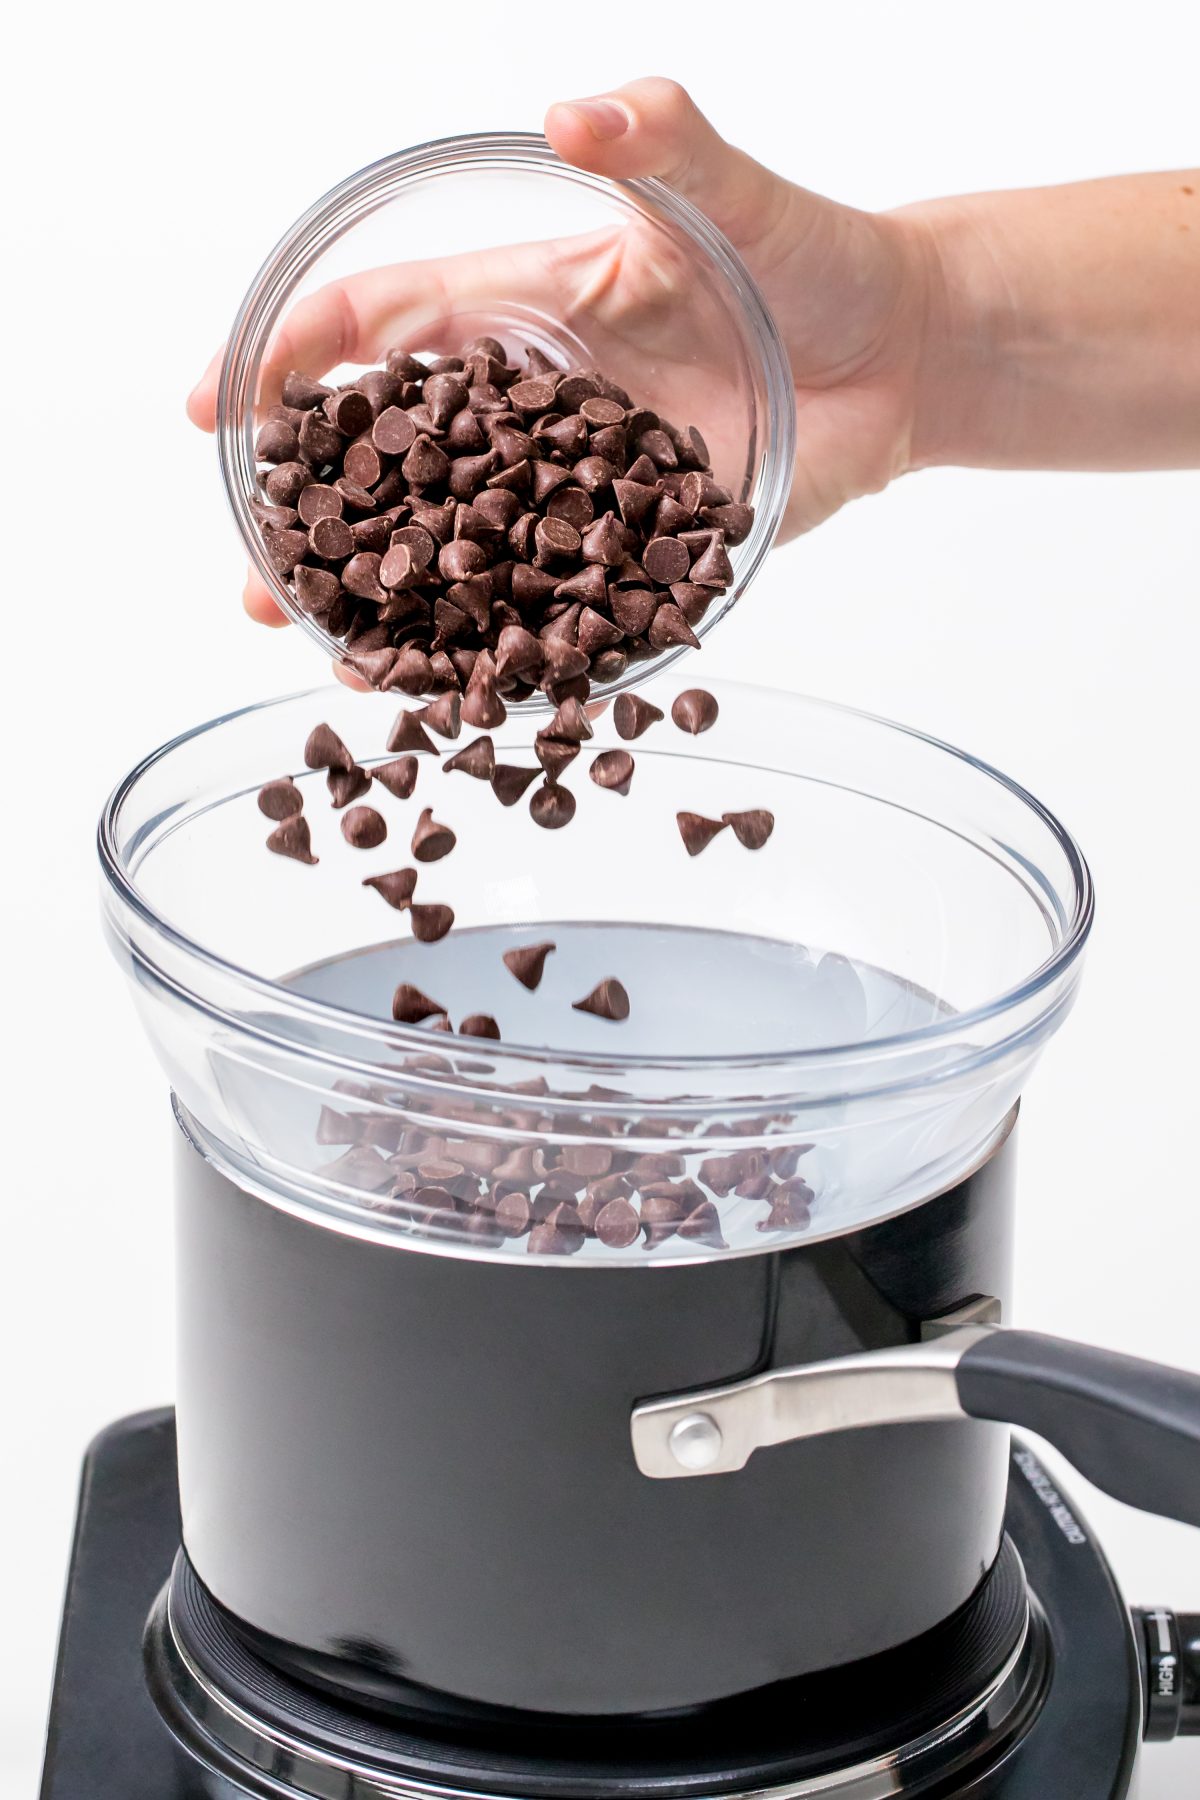 Start with one cup of chocolate chips